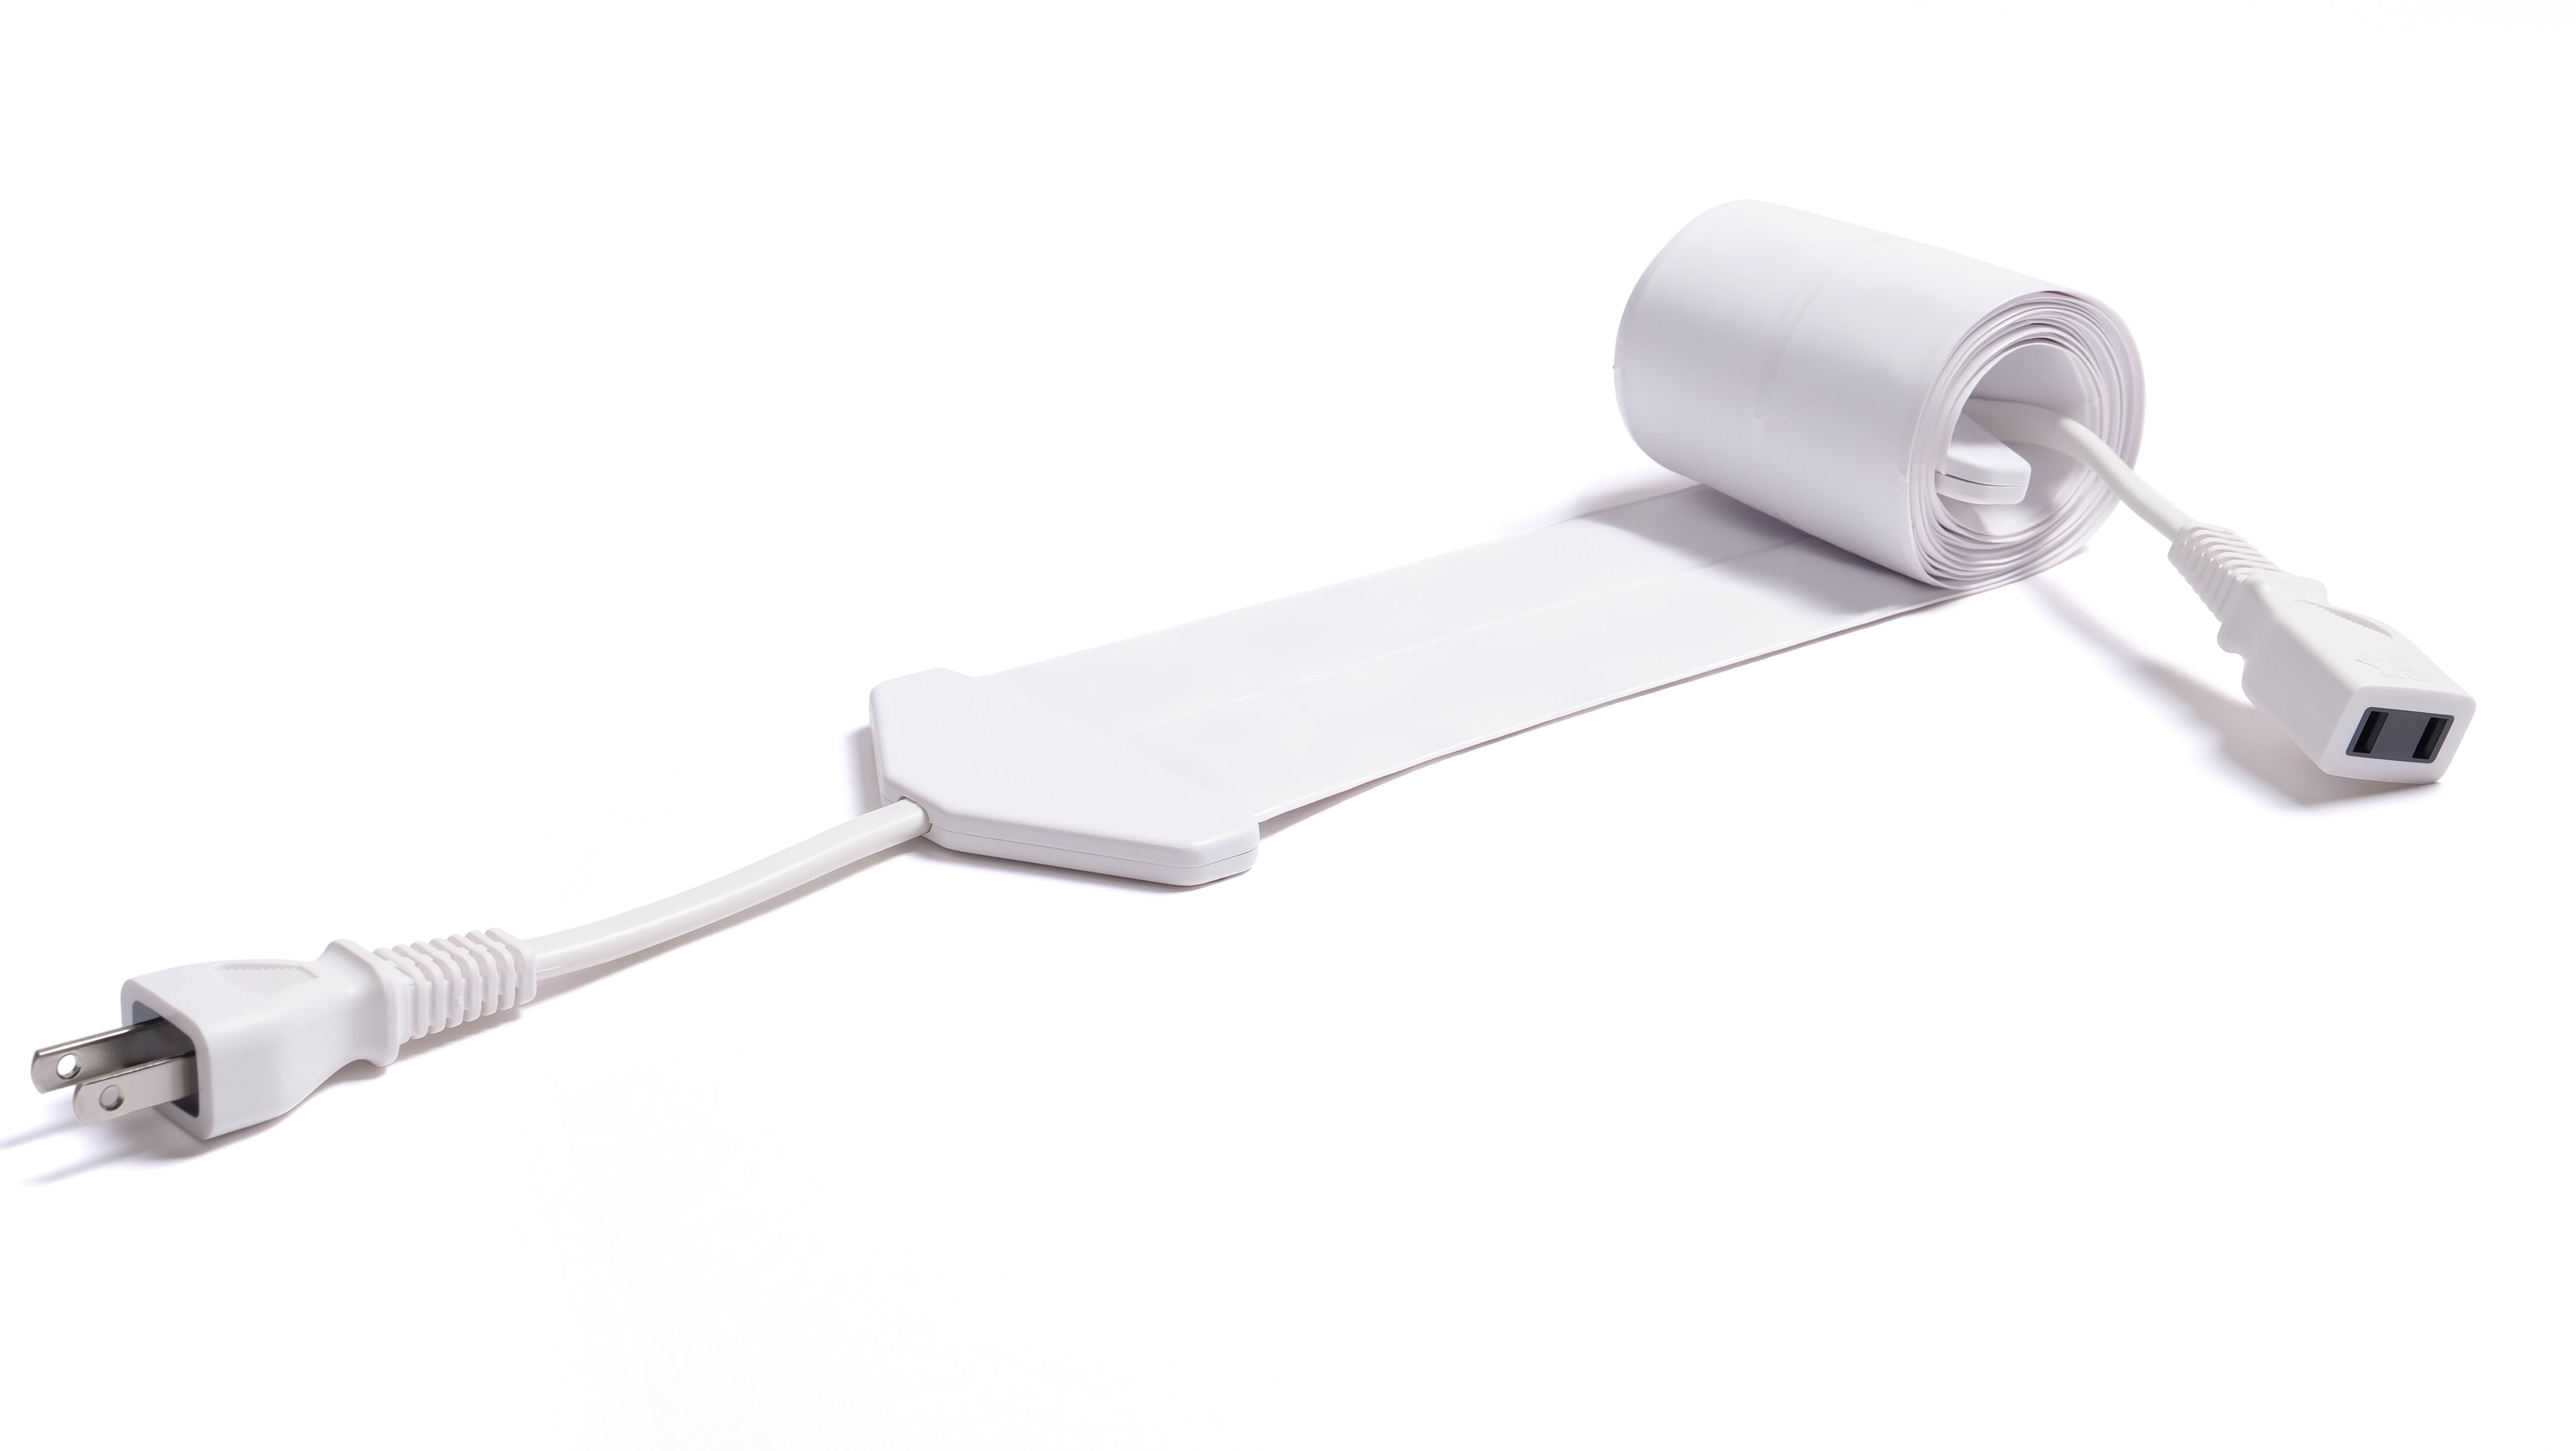 Koumeican the thinnest extension power cord in the world【White】